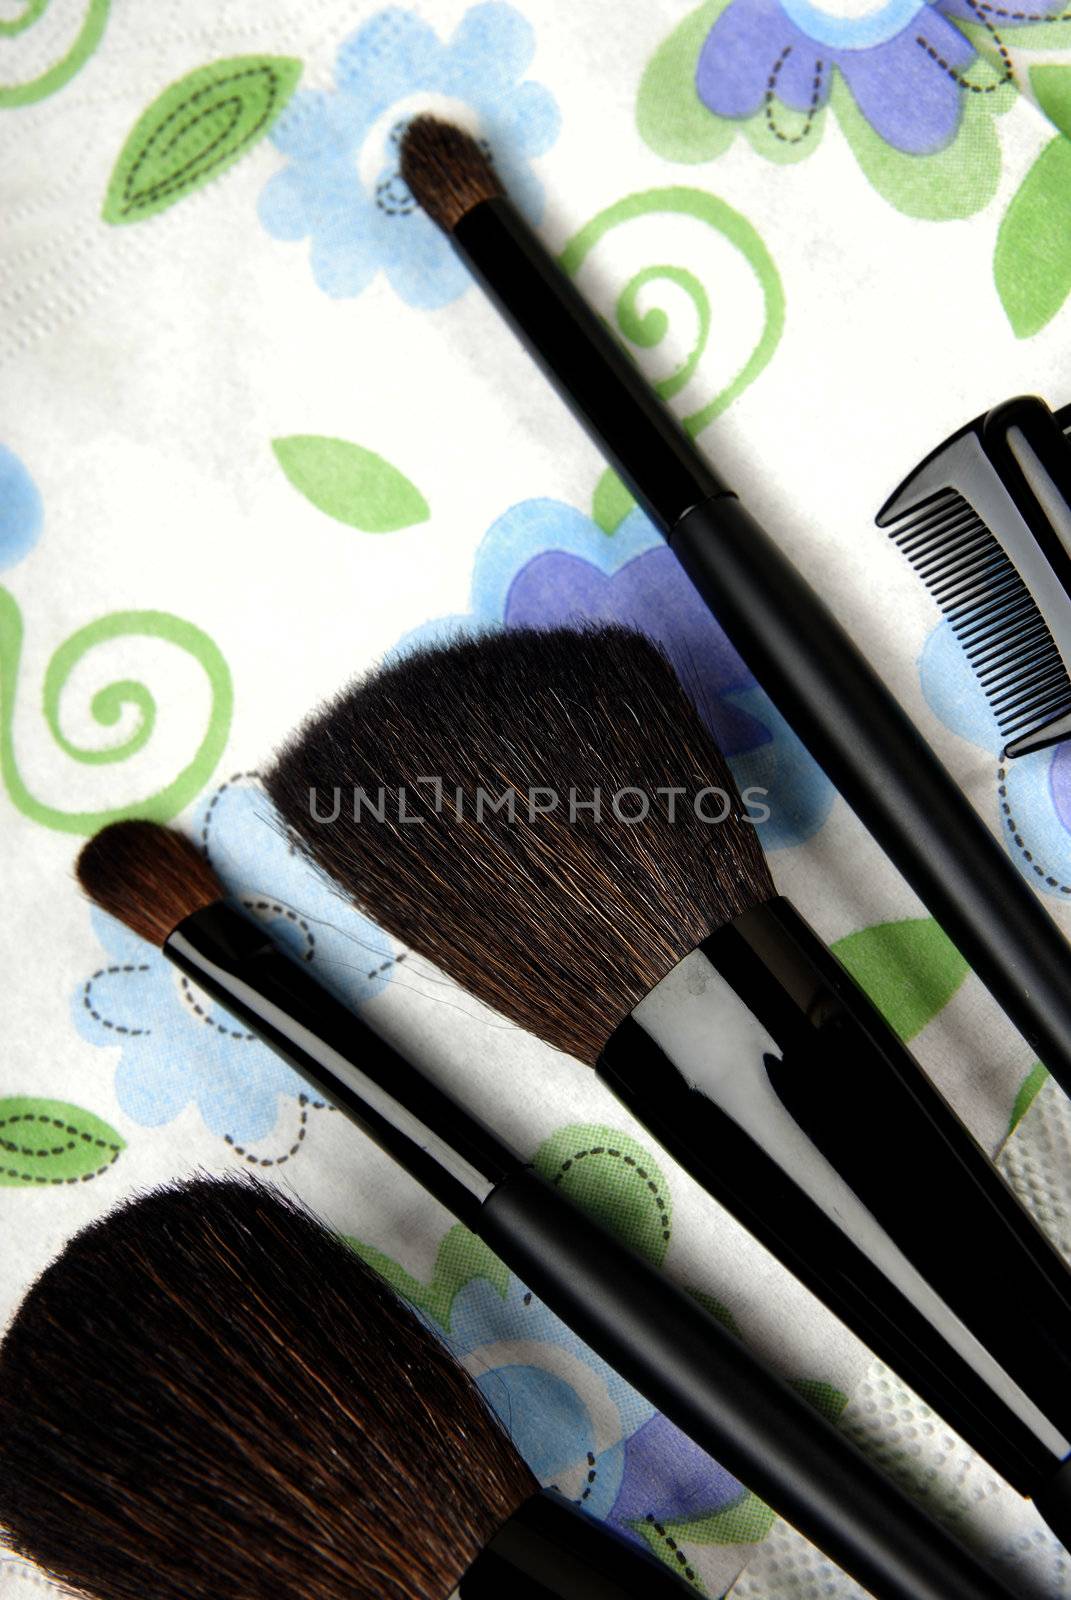 Five make-up tools by Novic